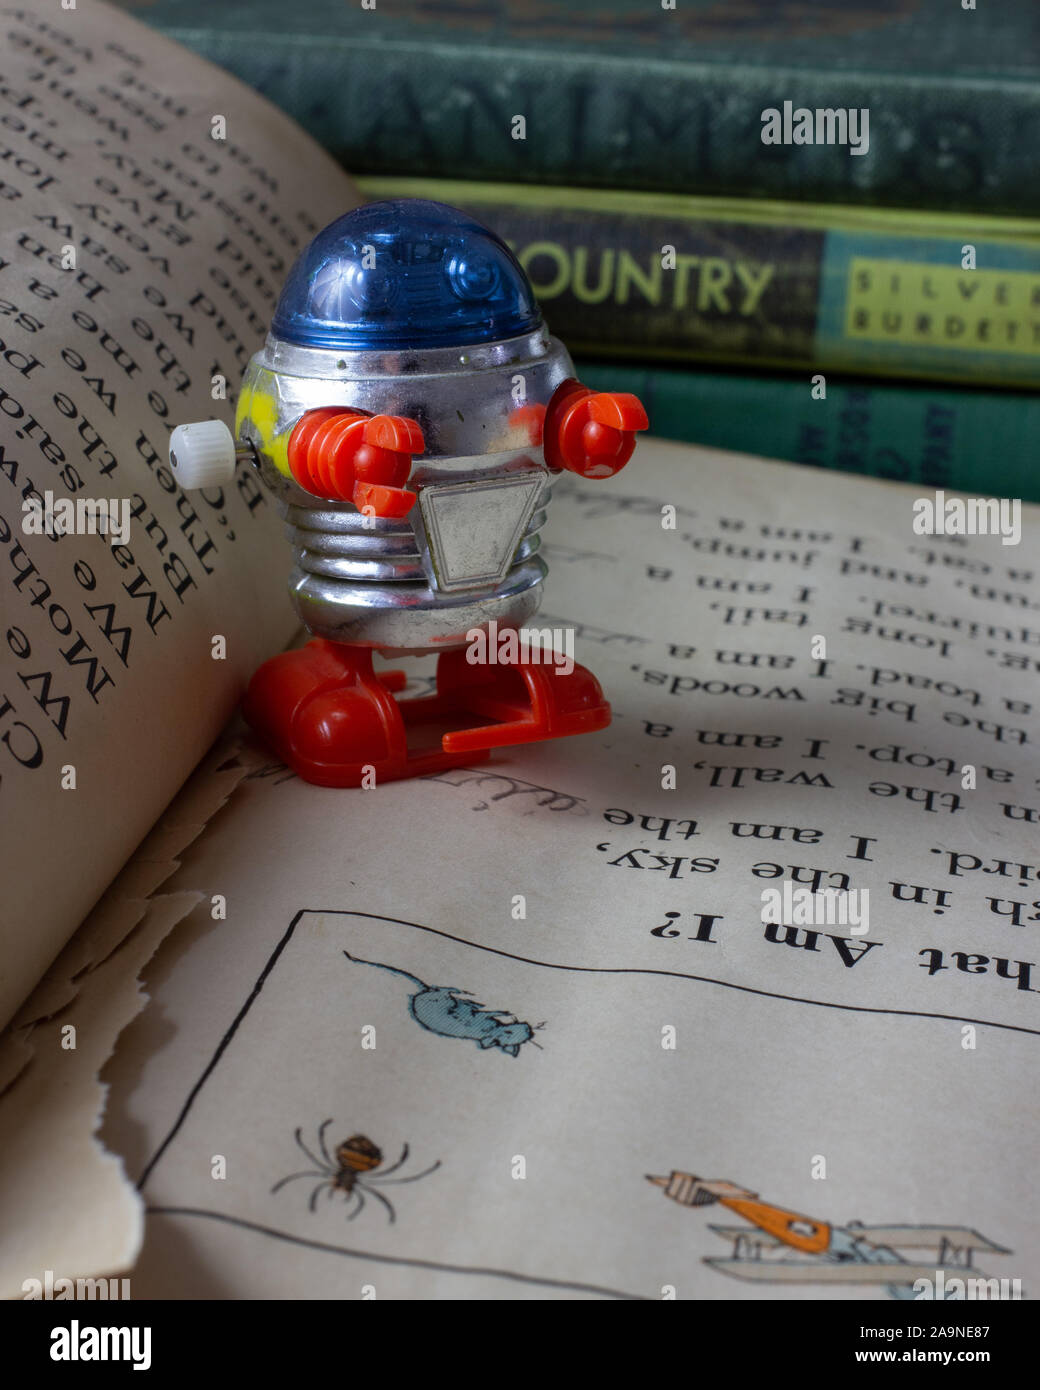 Tomy windup robot on an old reader Stock Photo